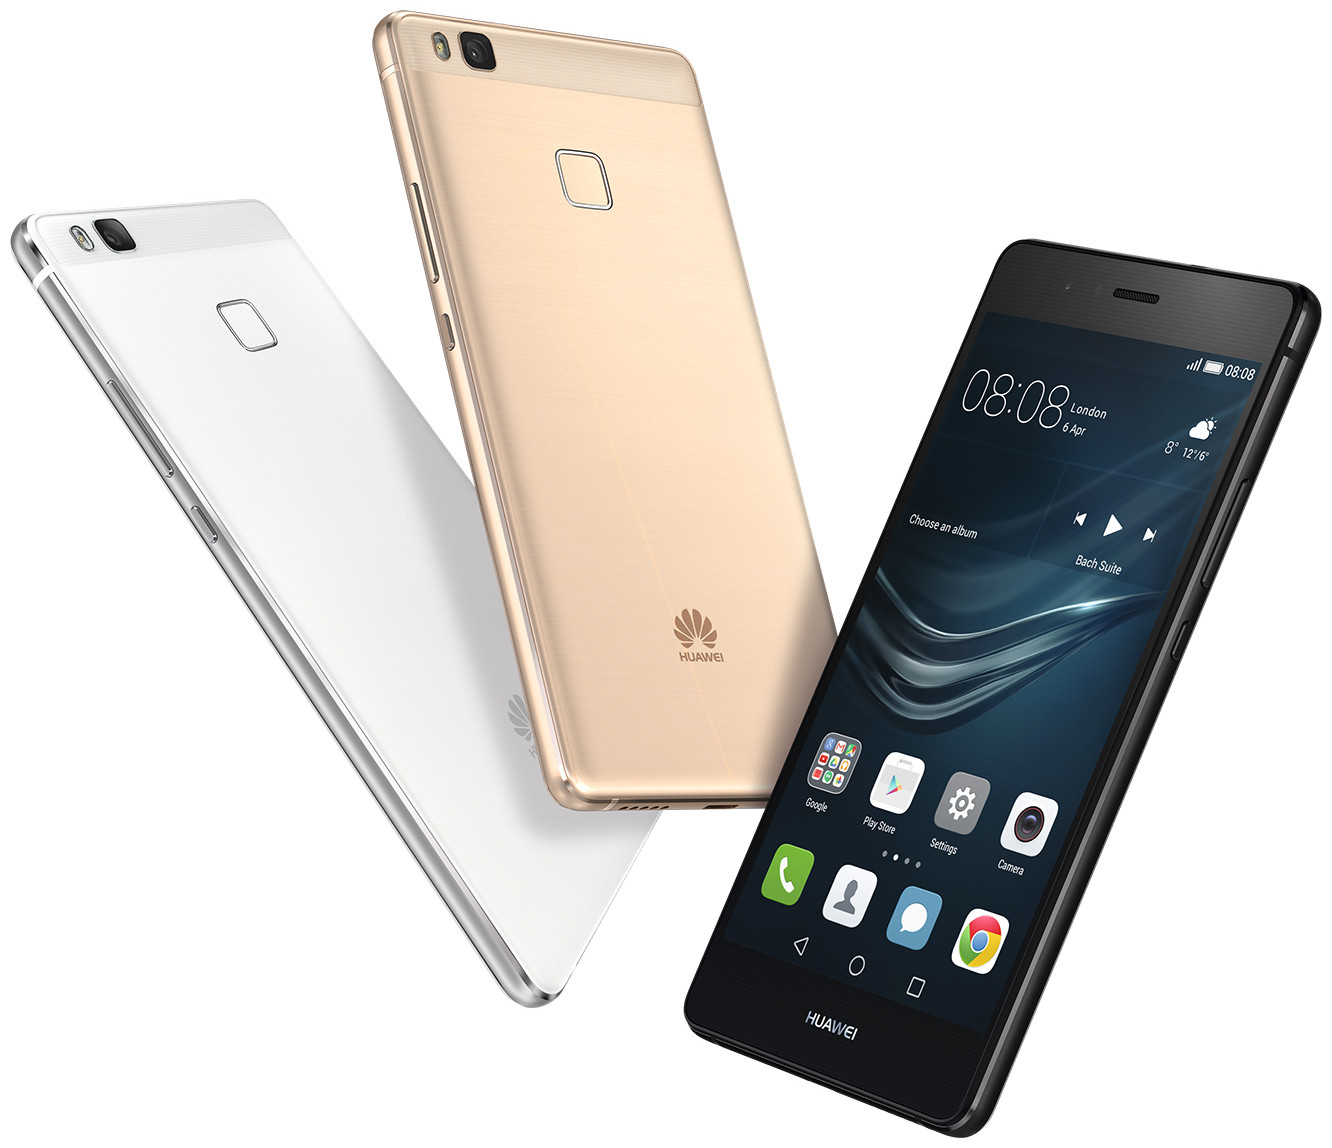 Huawei P9 Lite VNS-L21 2GB RAM - Specs and Price - Phonegg